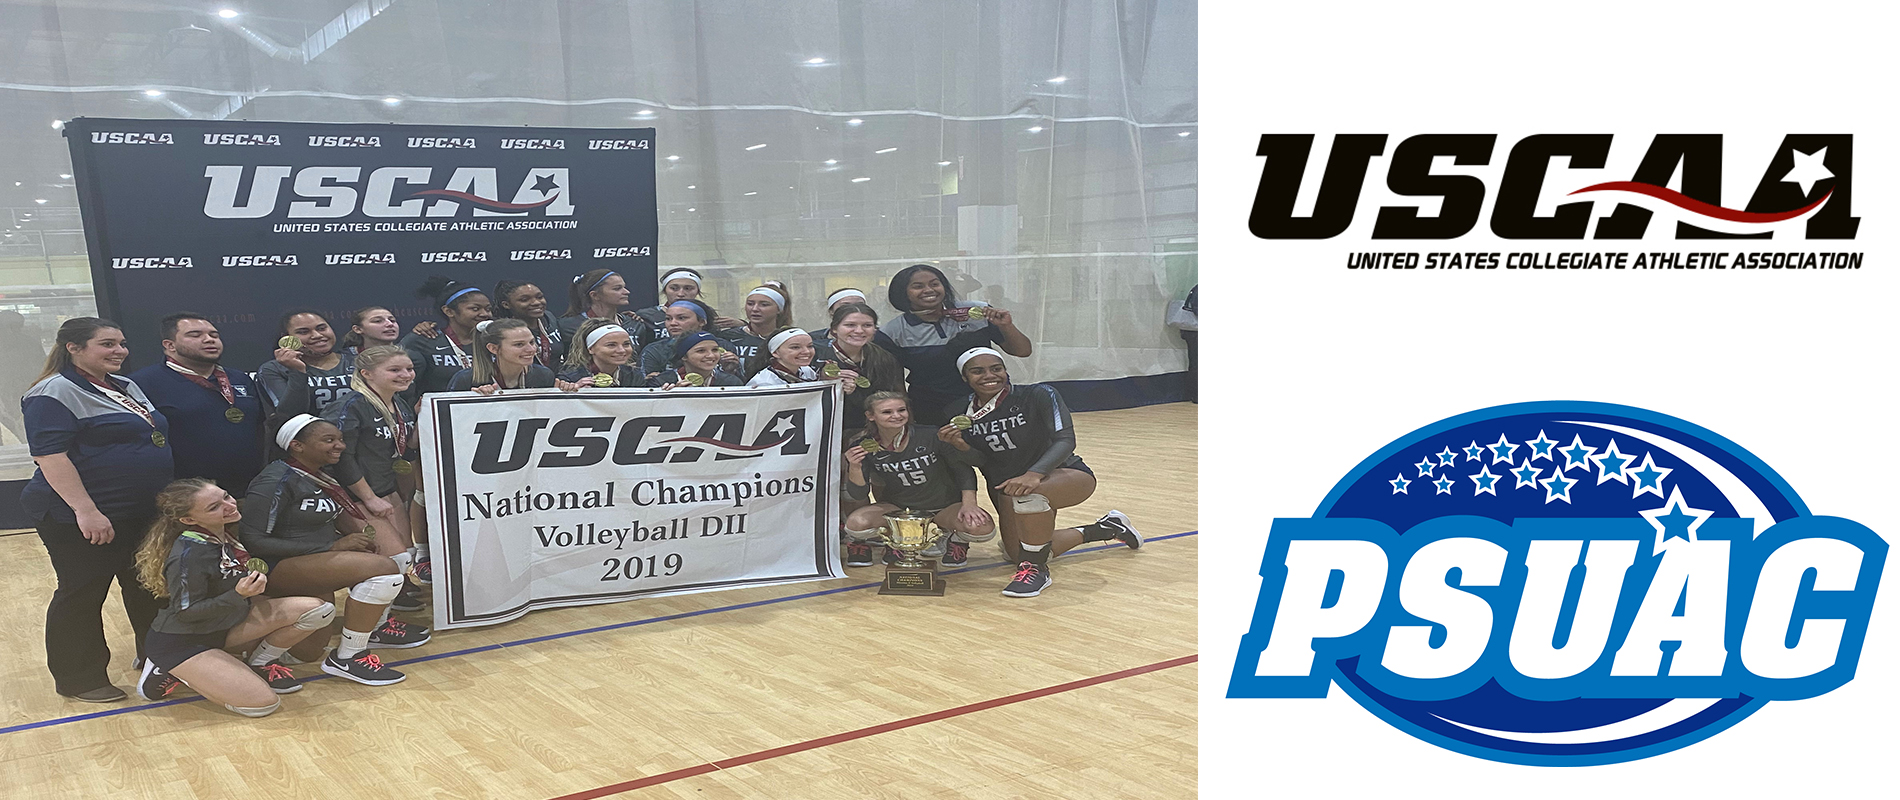 Penn State Fayette's volleyball team won the 2019 USCAA Volleyball Division II National Championship.